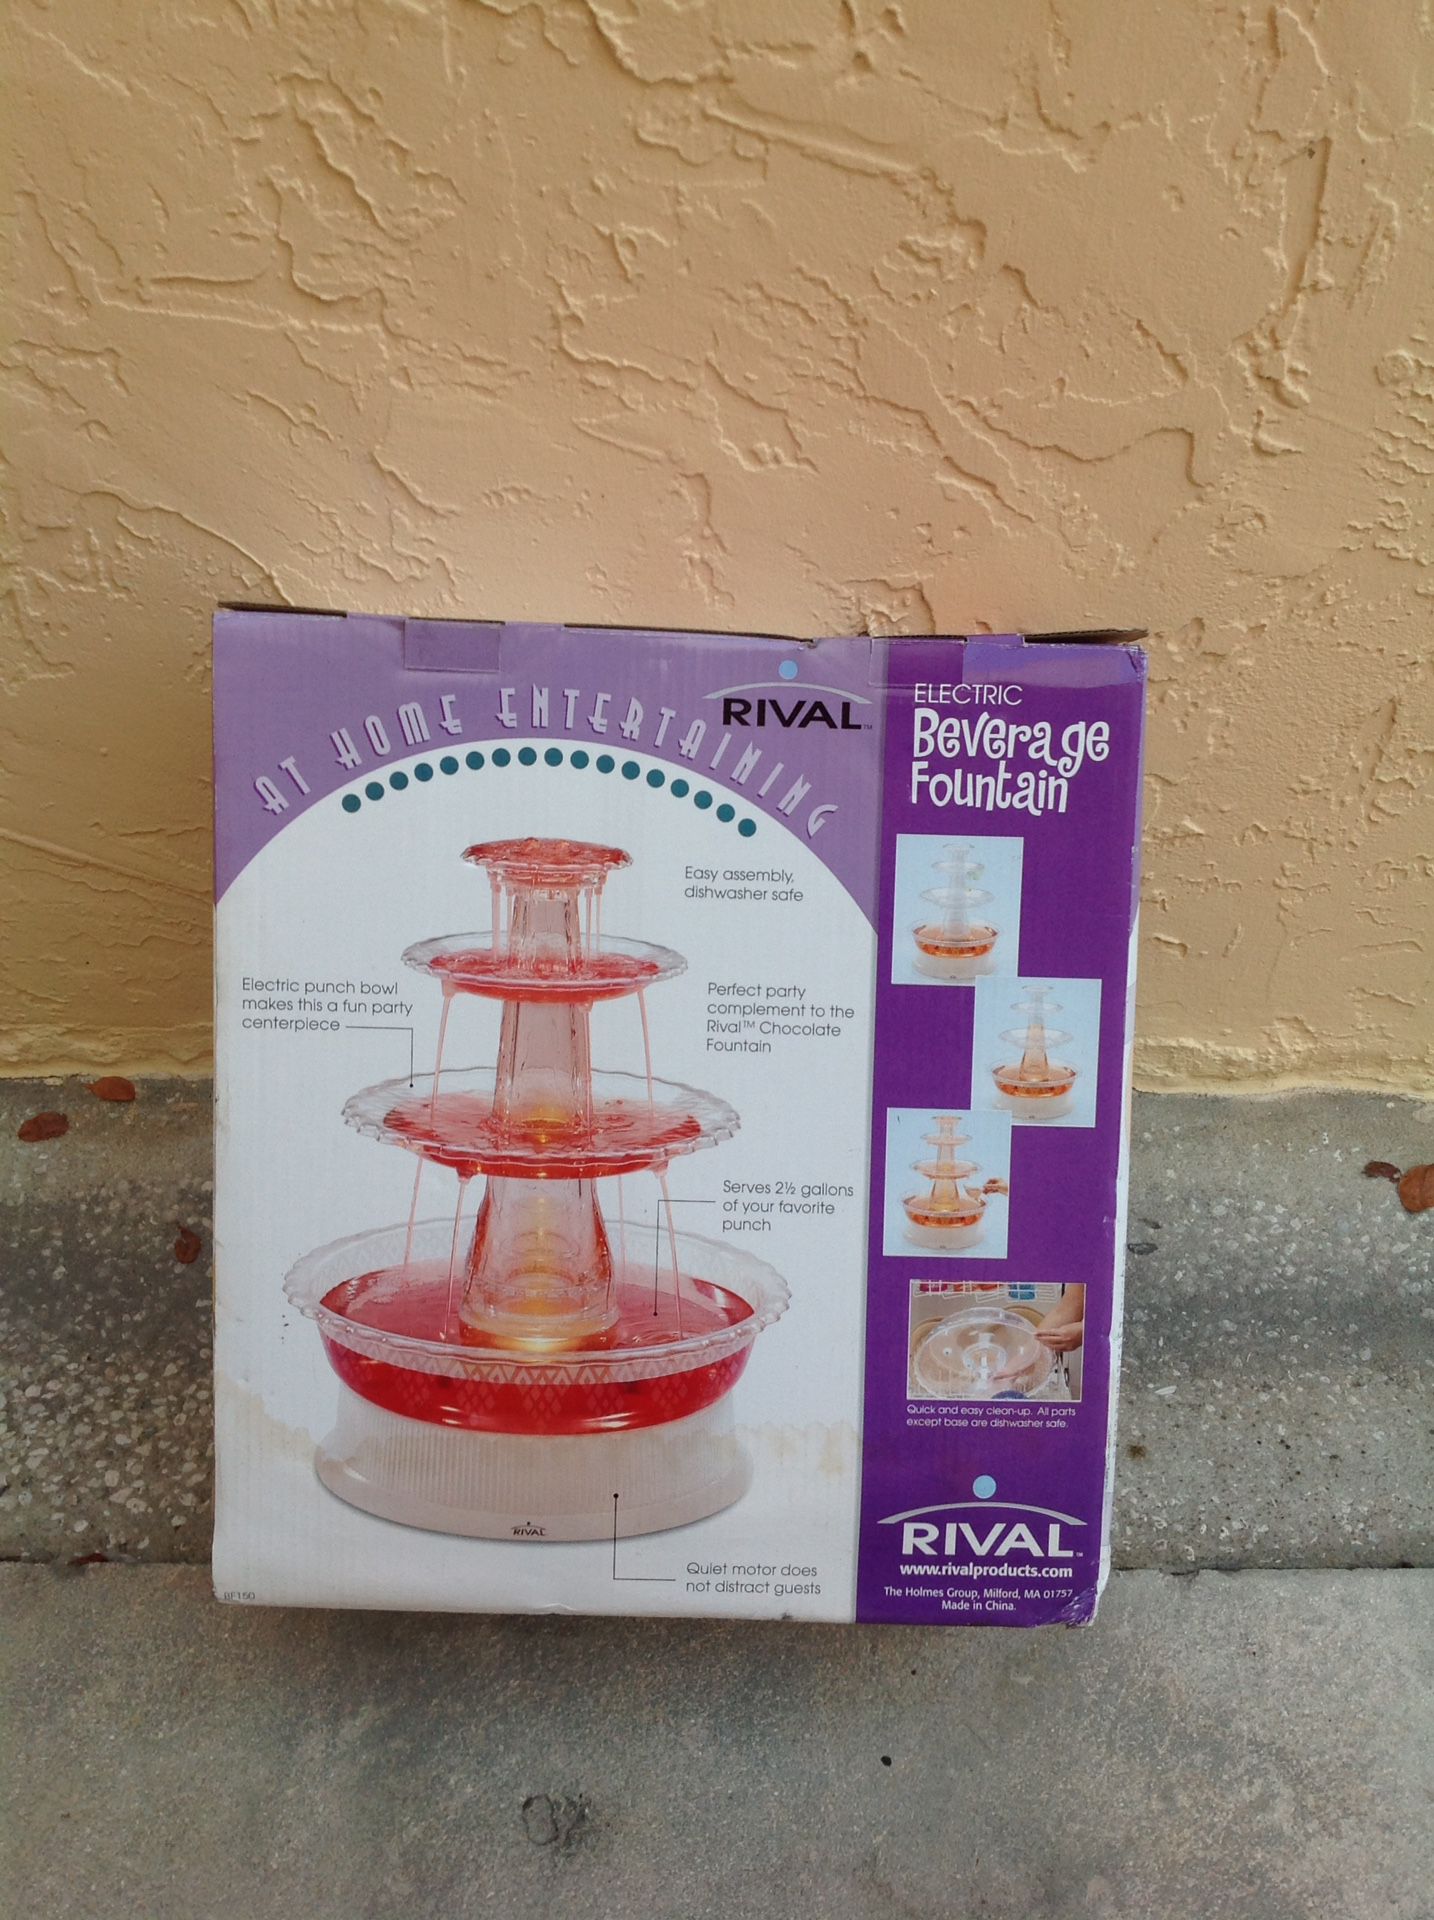 BEVERAGE FOUNTAIN ELECTRIC BRAND NEW NEVER USED